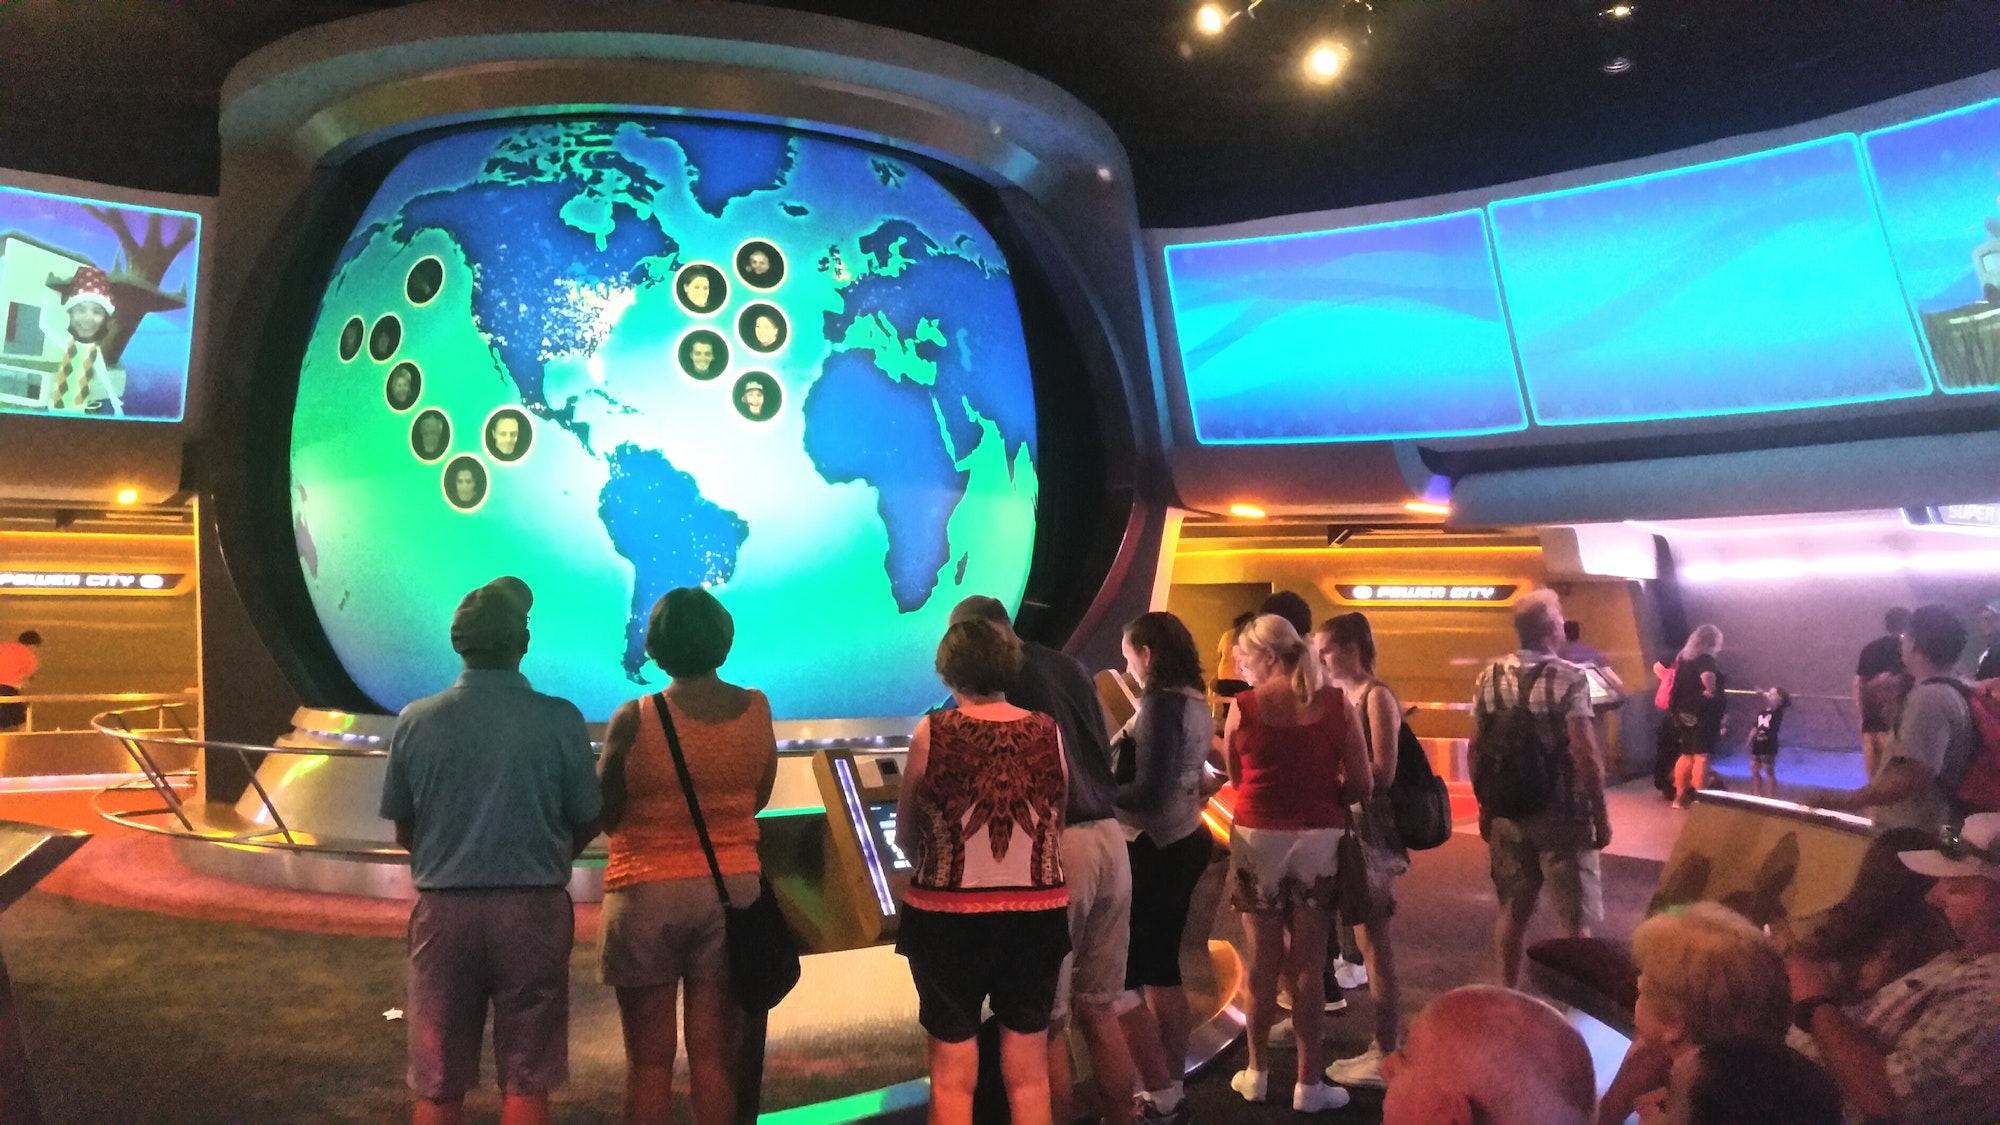 Family fun visiting a tourist attraction at Disney world with neon lights and world map of data.